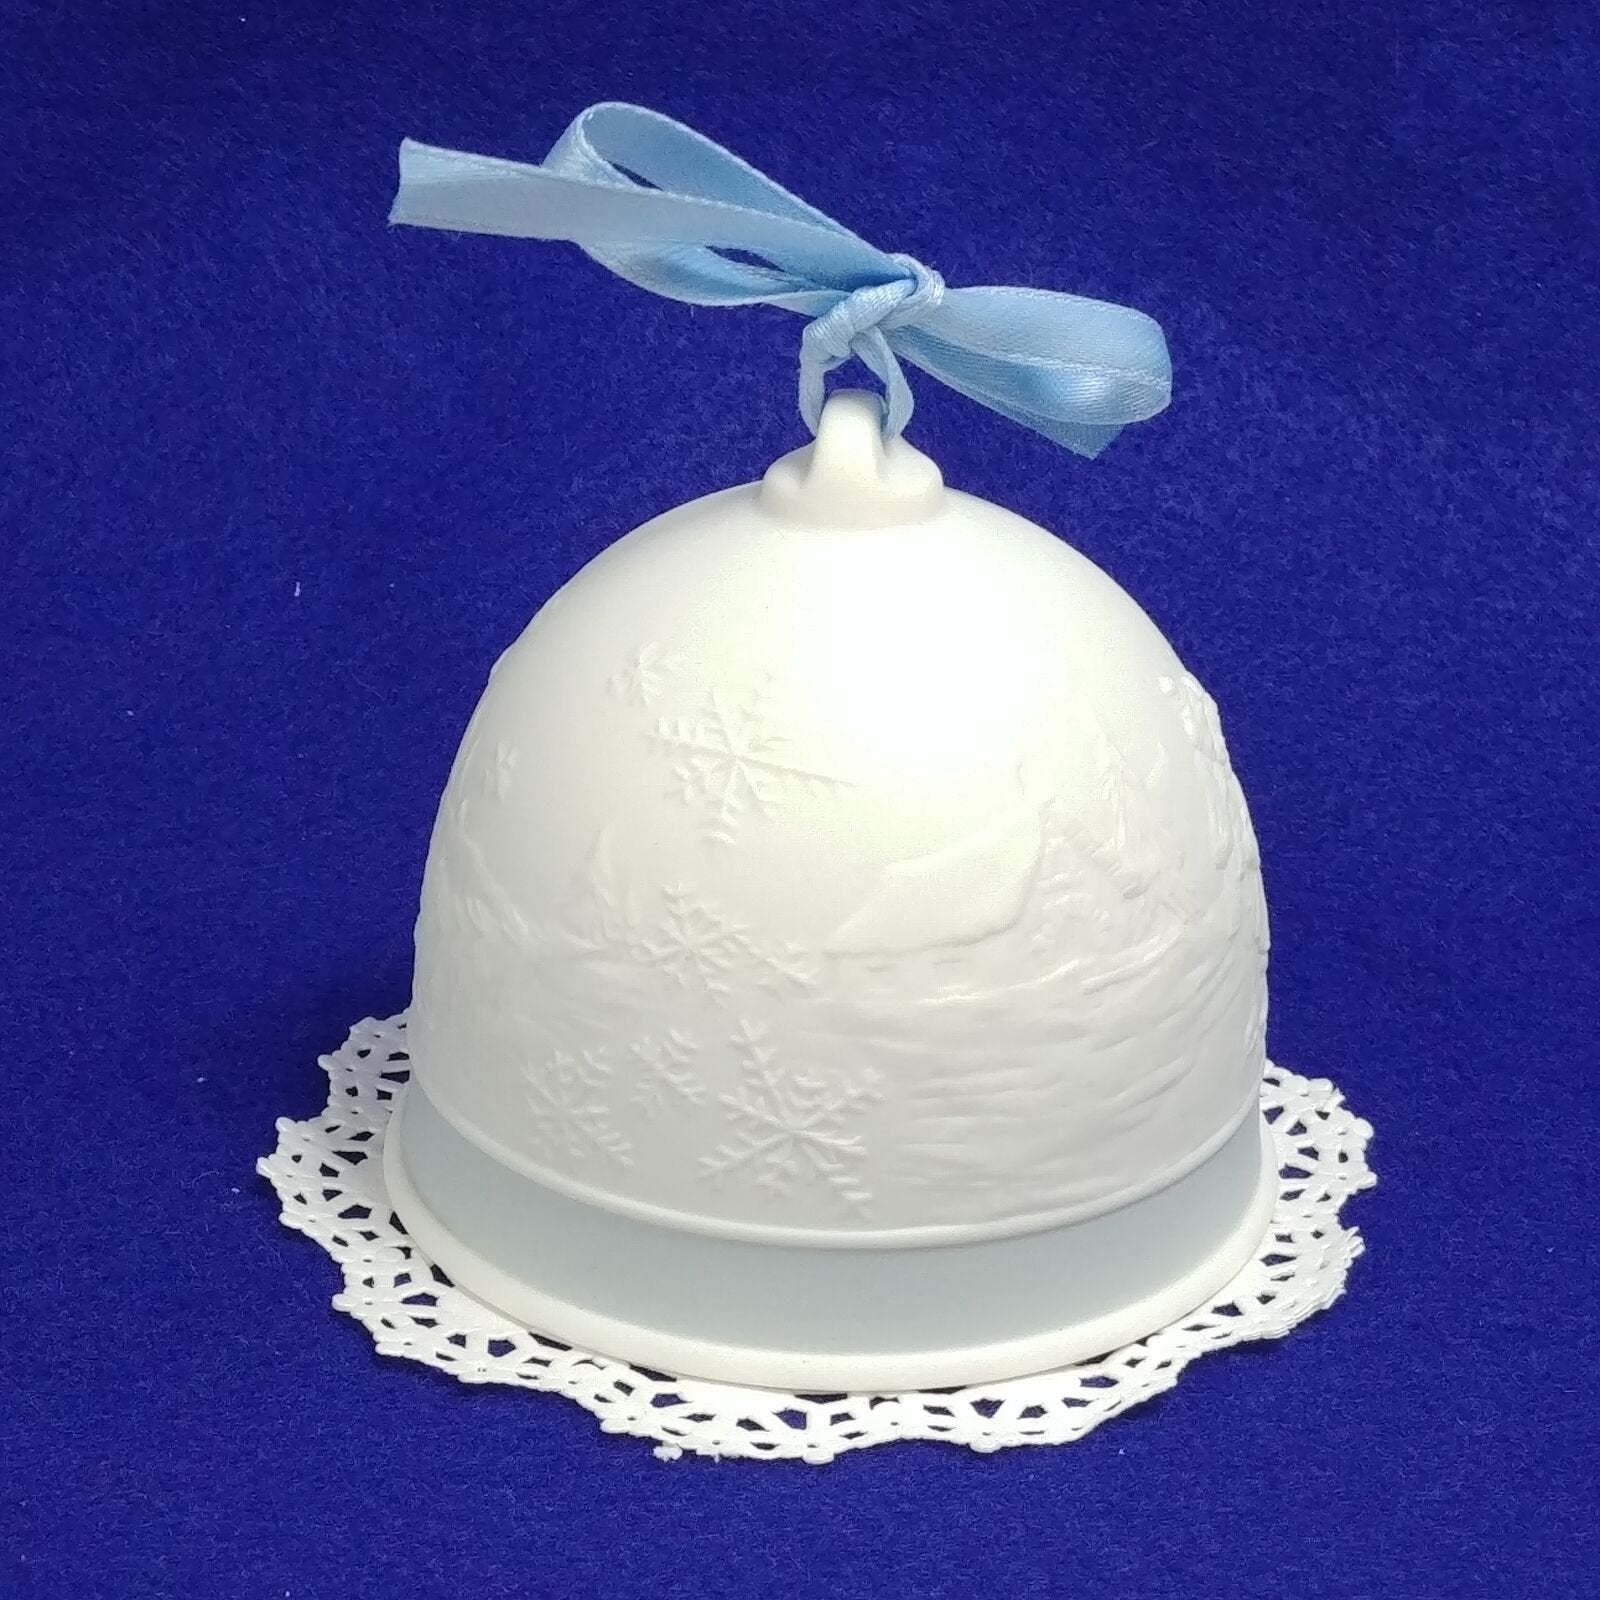 Lladro Ornament Collectors Society "Winter Bell" 17616 with Box